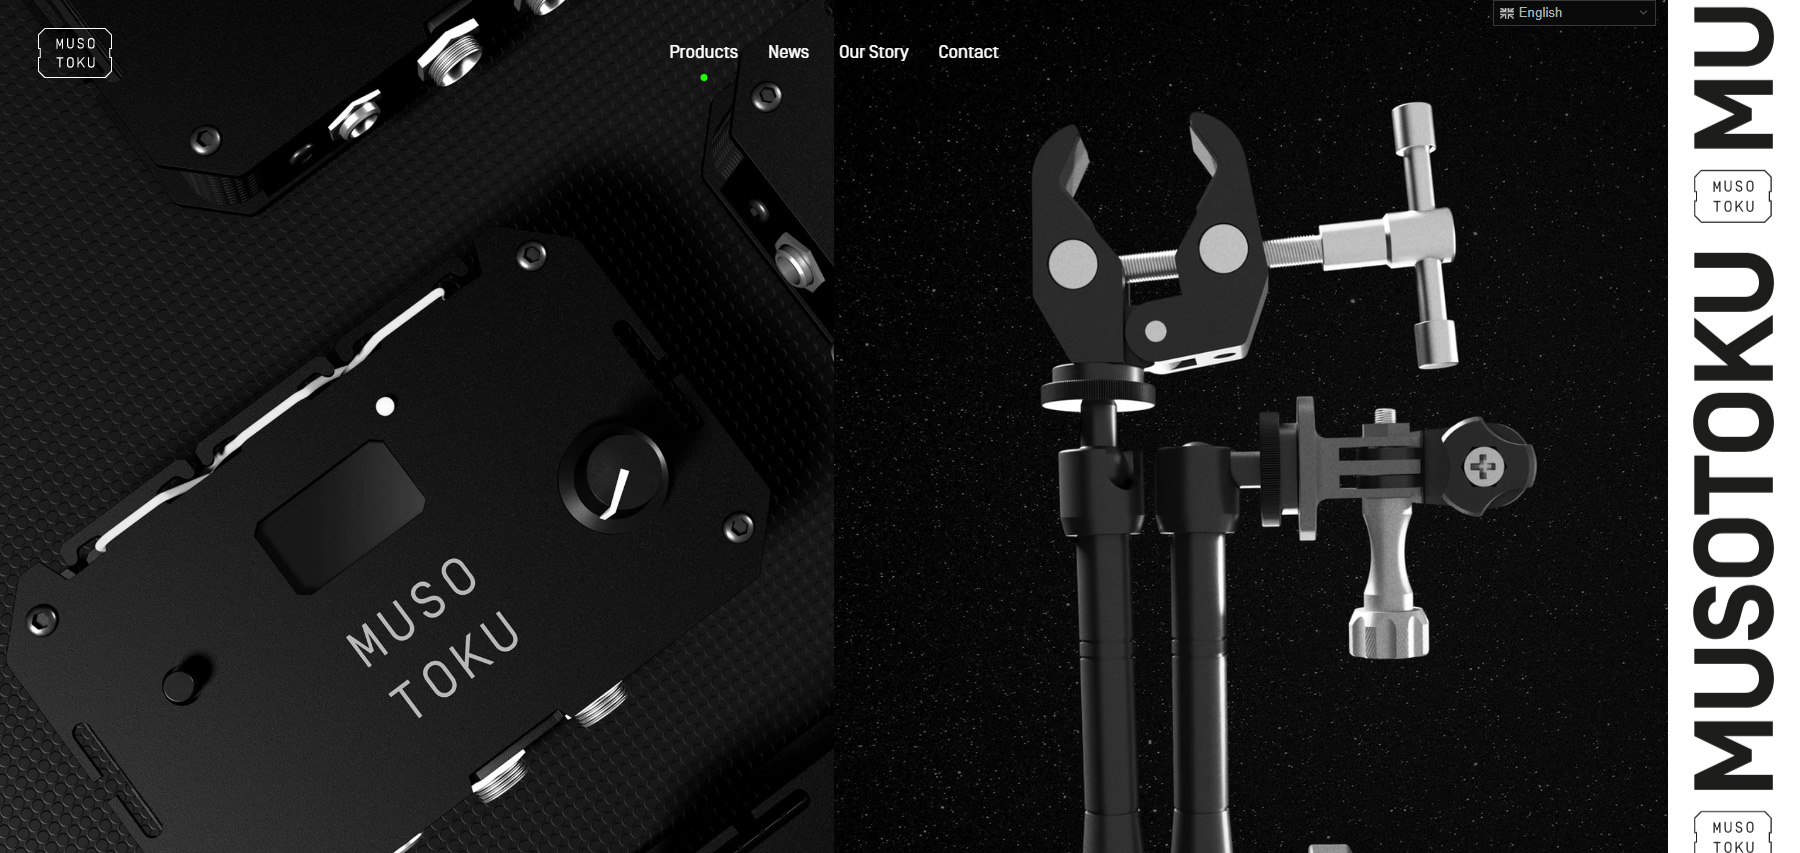 Musotoku - Website of the Day